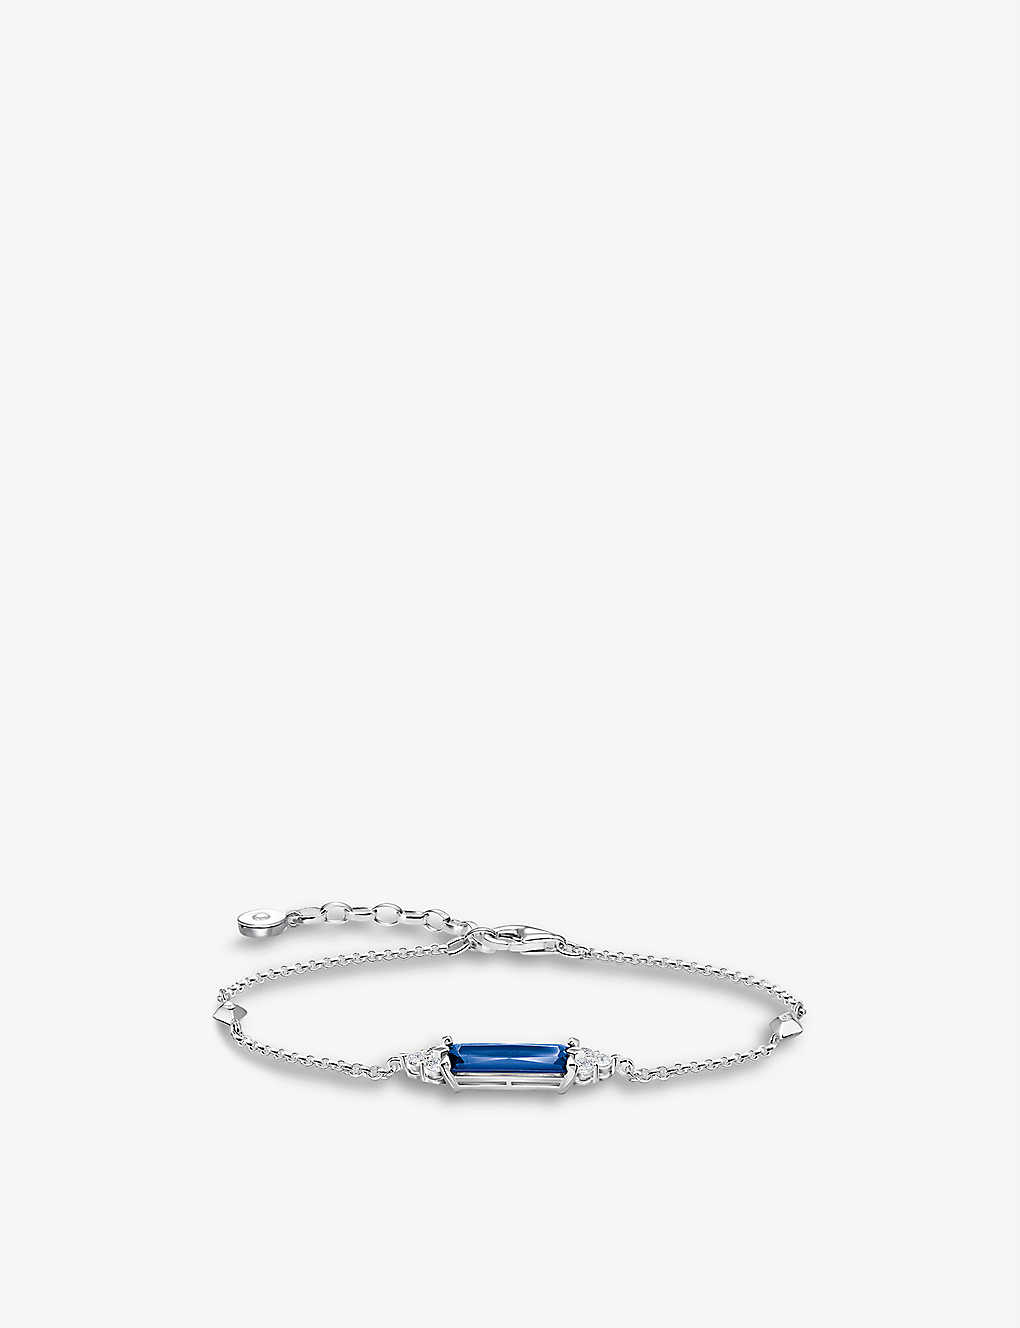 Thomas Sabo Women's Blue Moon And Star Sterling-silver, Cubic Zirconia And Spinel Chain Bracelet